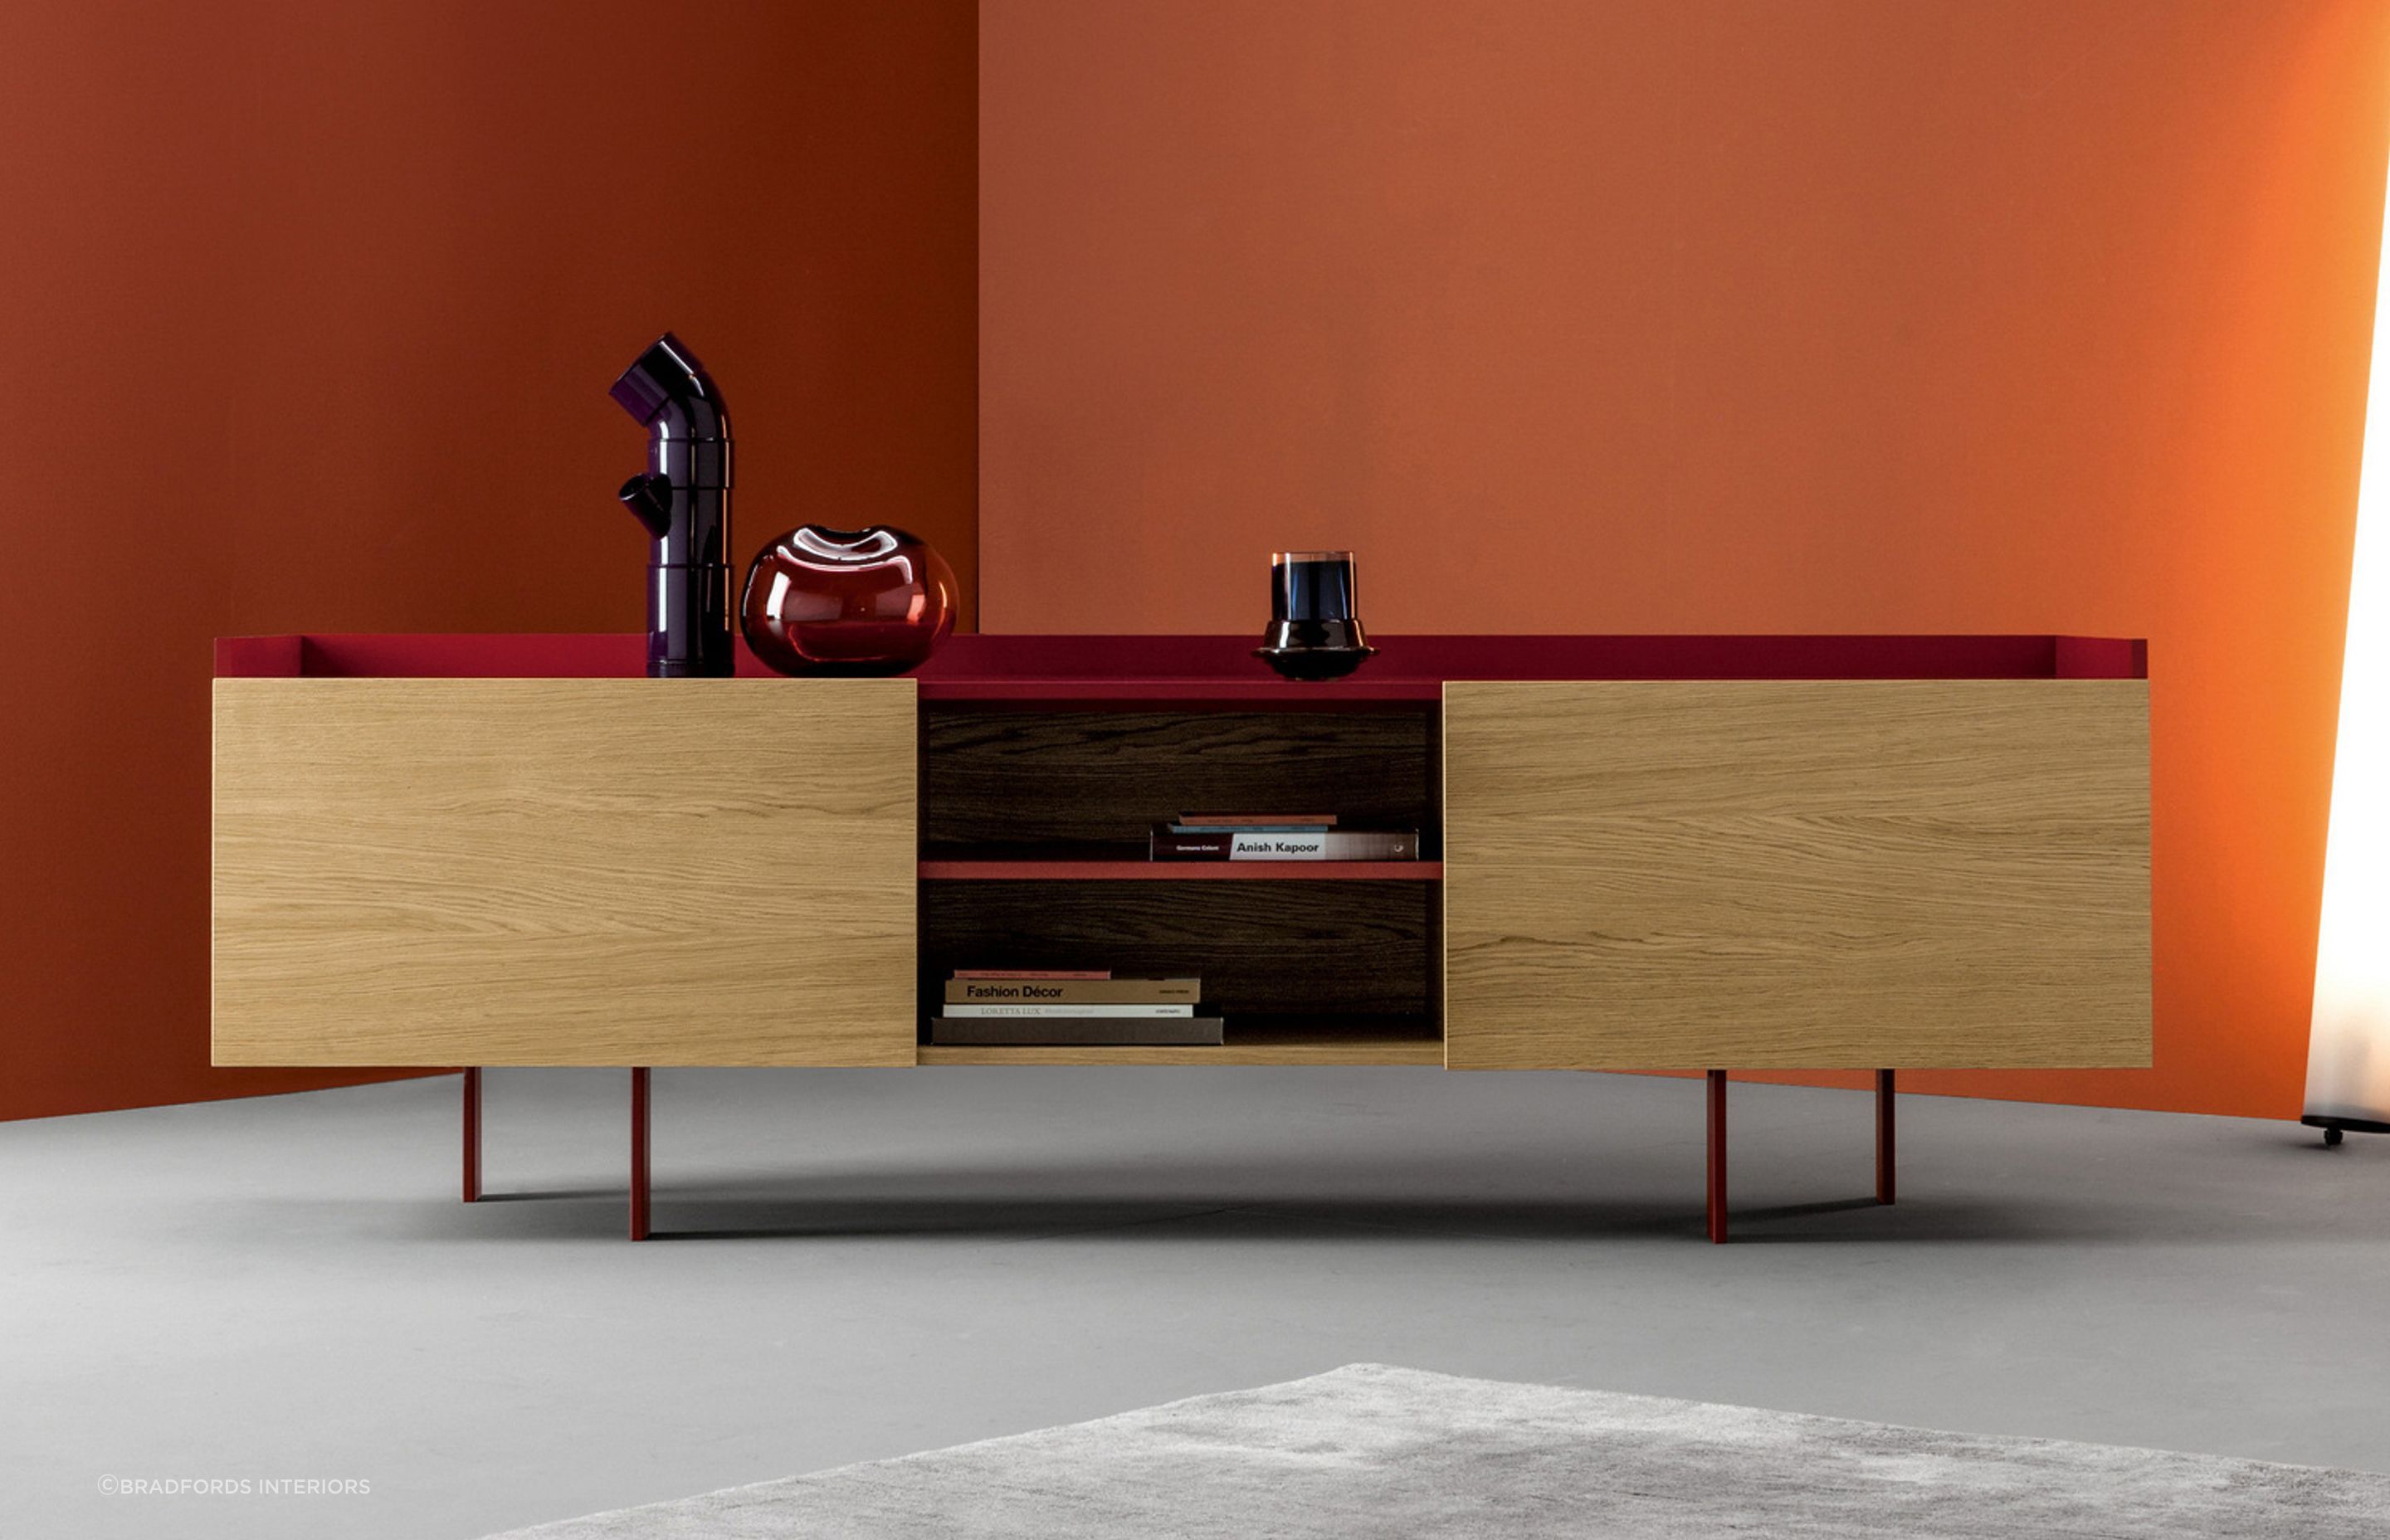 The Tratto Buffet by Bonaldo is a great example of buffet table that can add unique flair to a living space